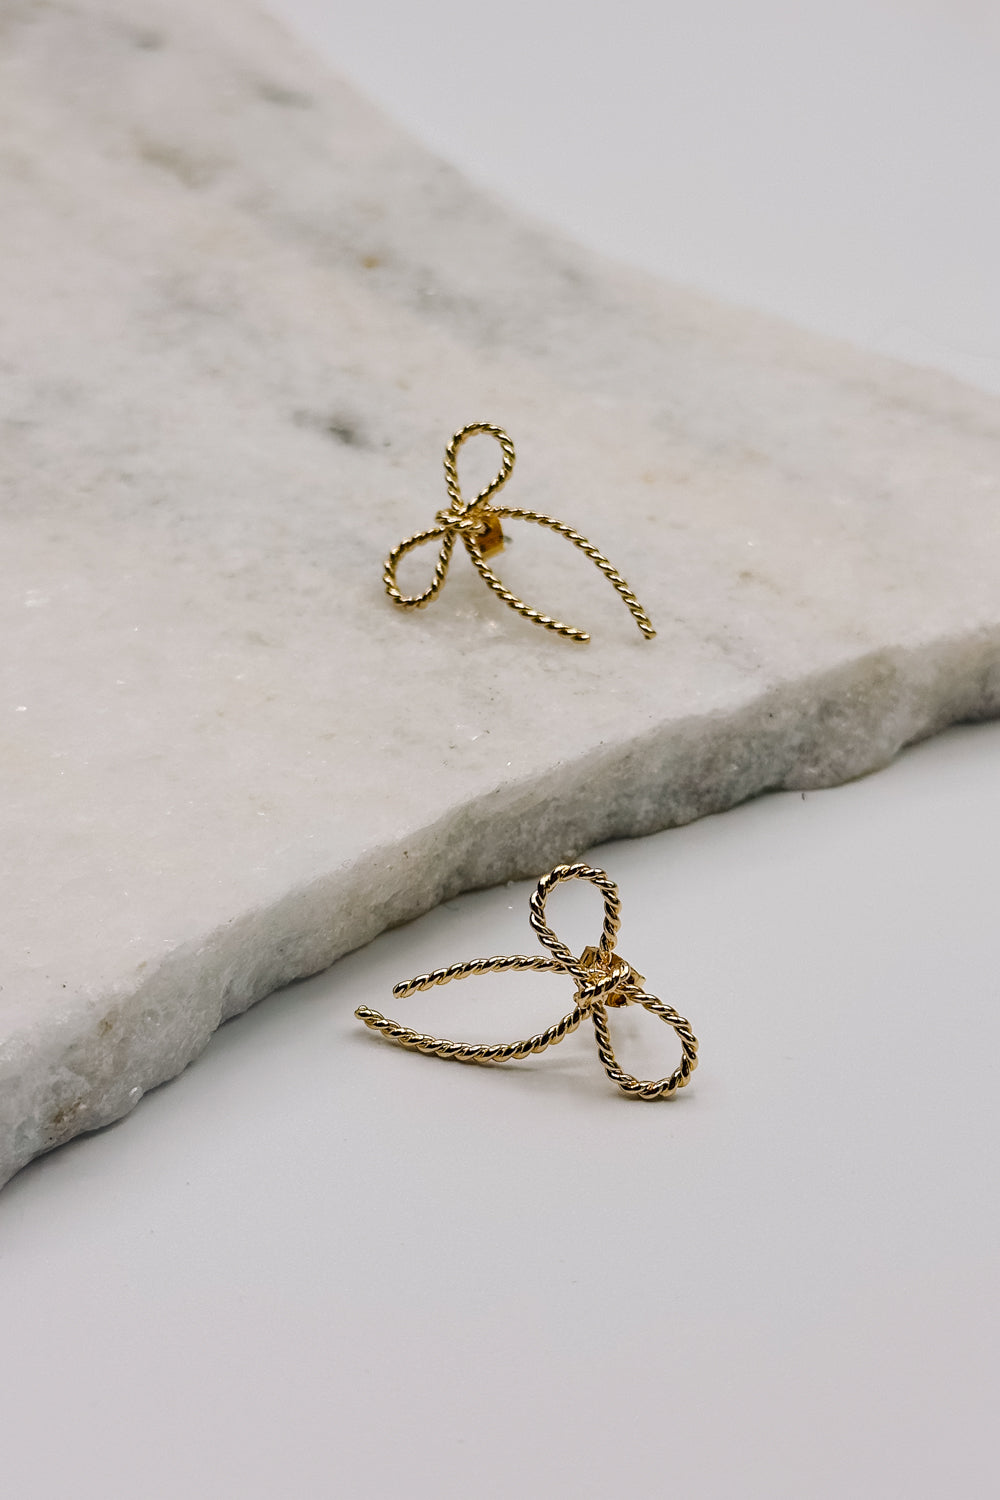 Close up view of the Alice Gold Roped Bow Stud Earring which features gold roped bow shaped studs